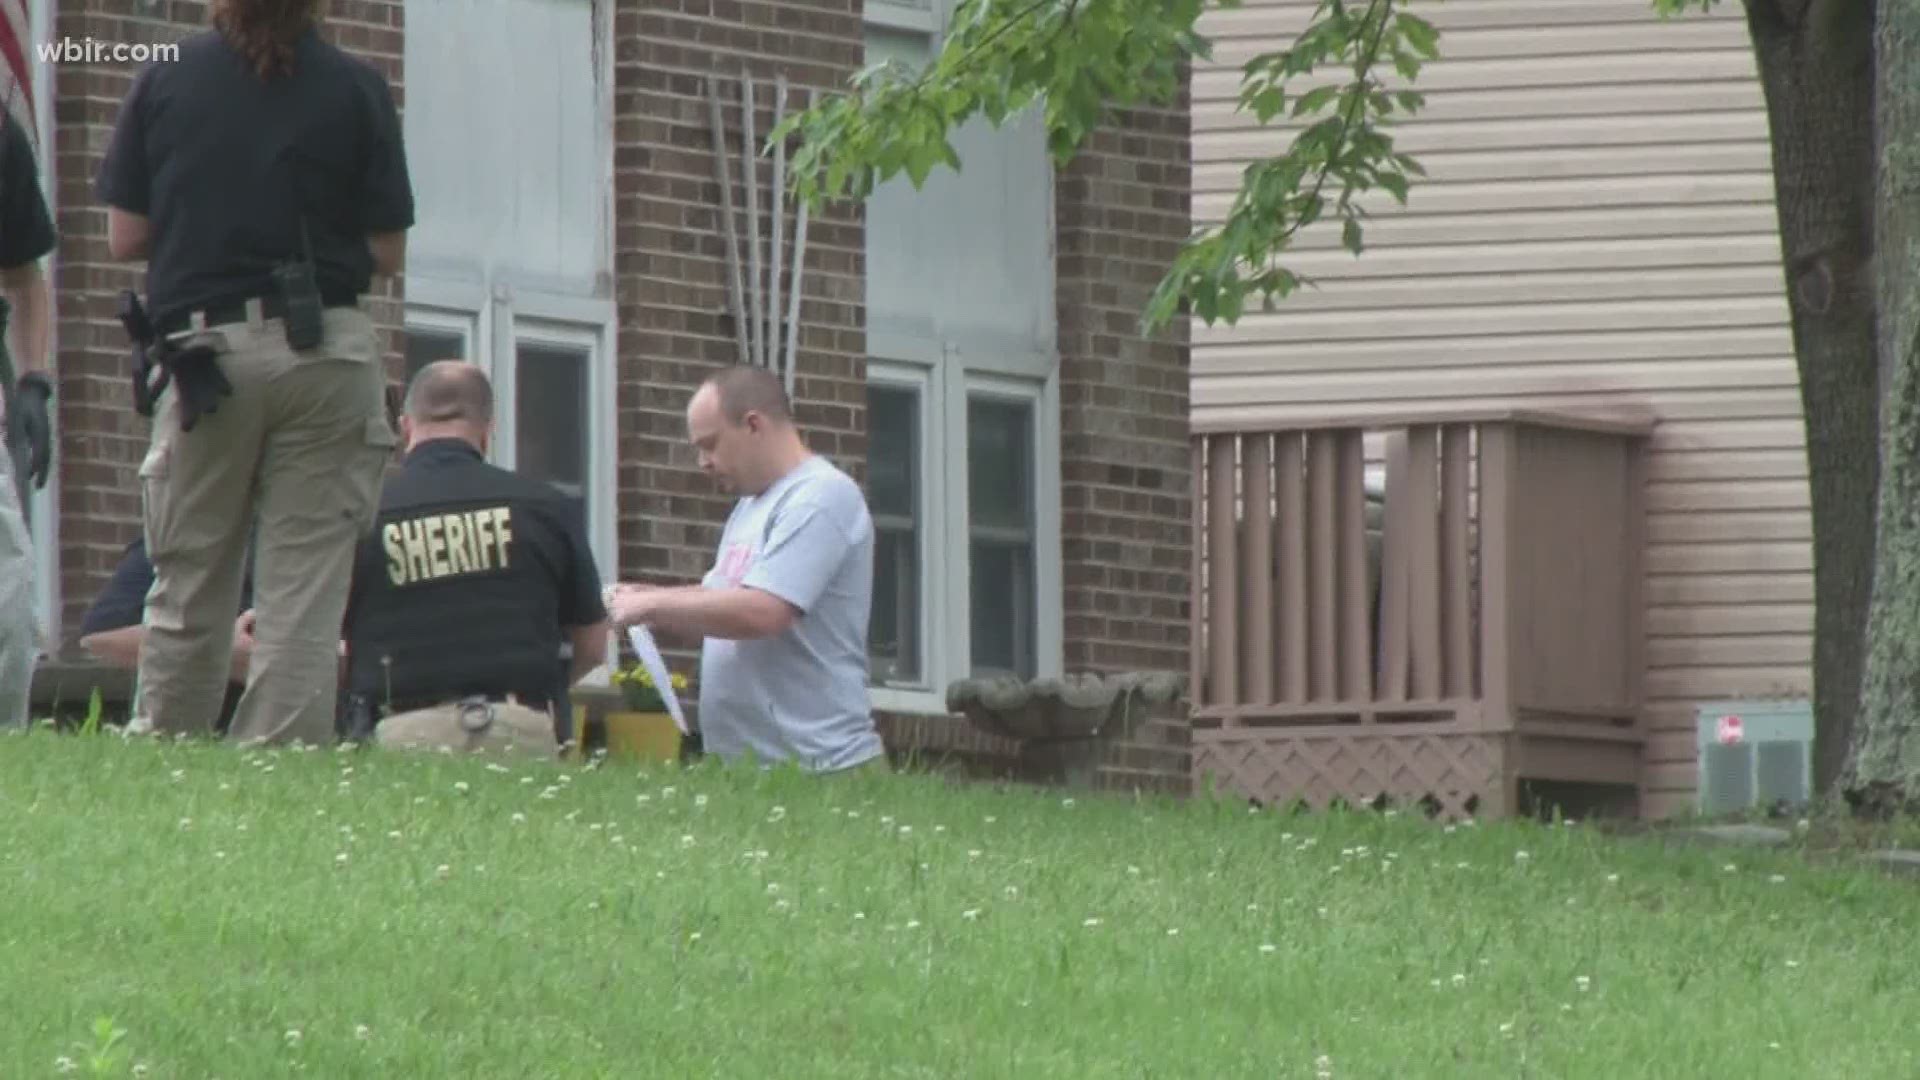 Officers went through the house for six hours, hauling out bags of evidence.